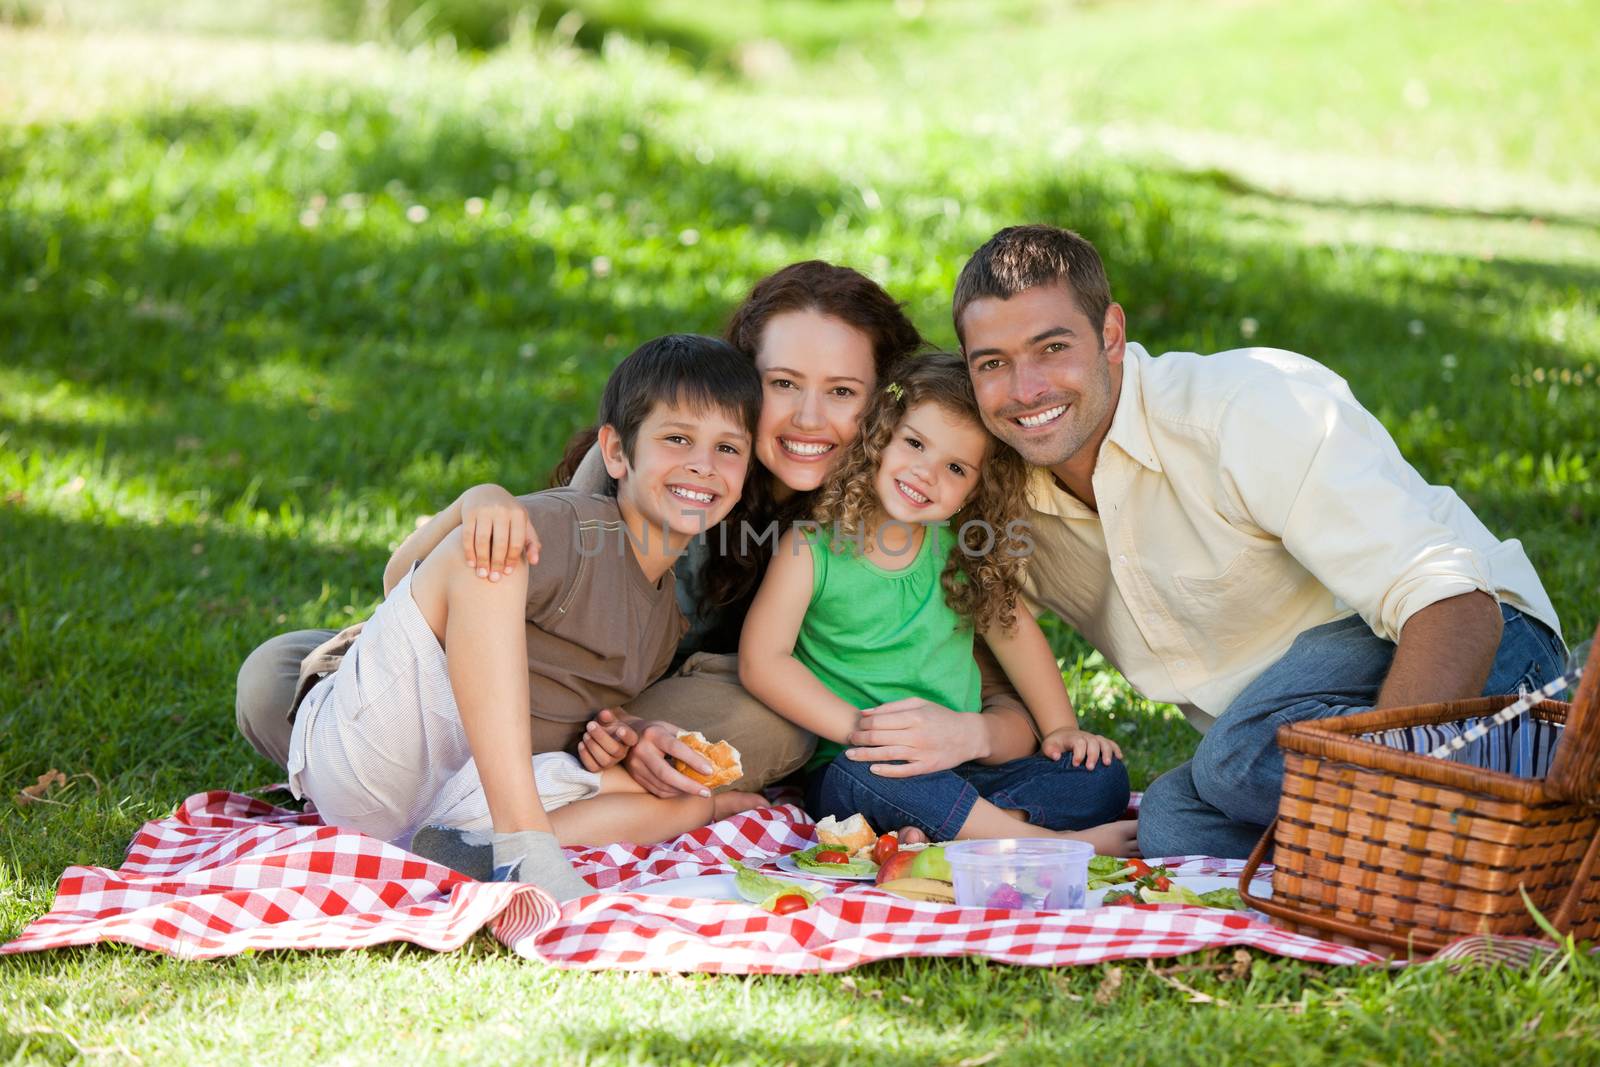 Family picnicking together by Wavebreakmedia